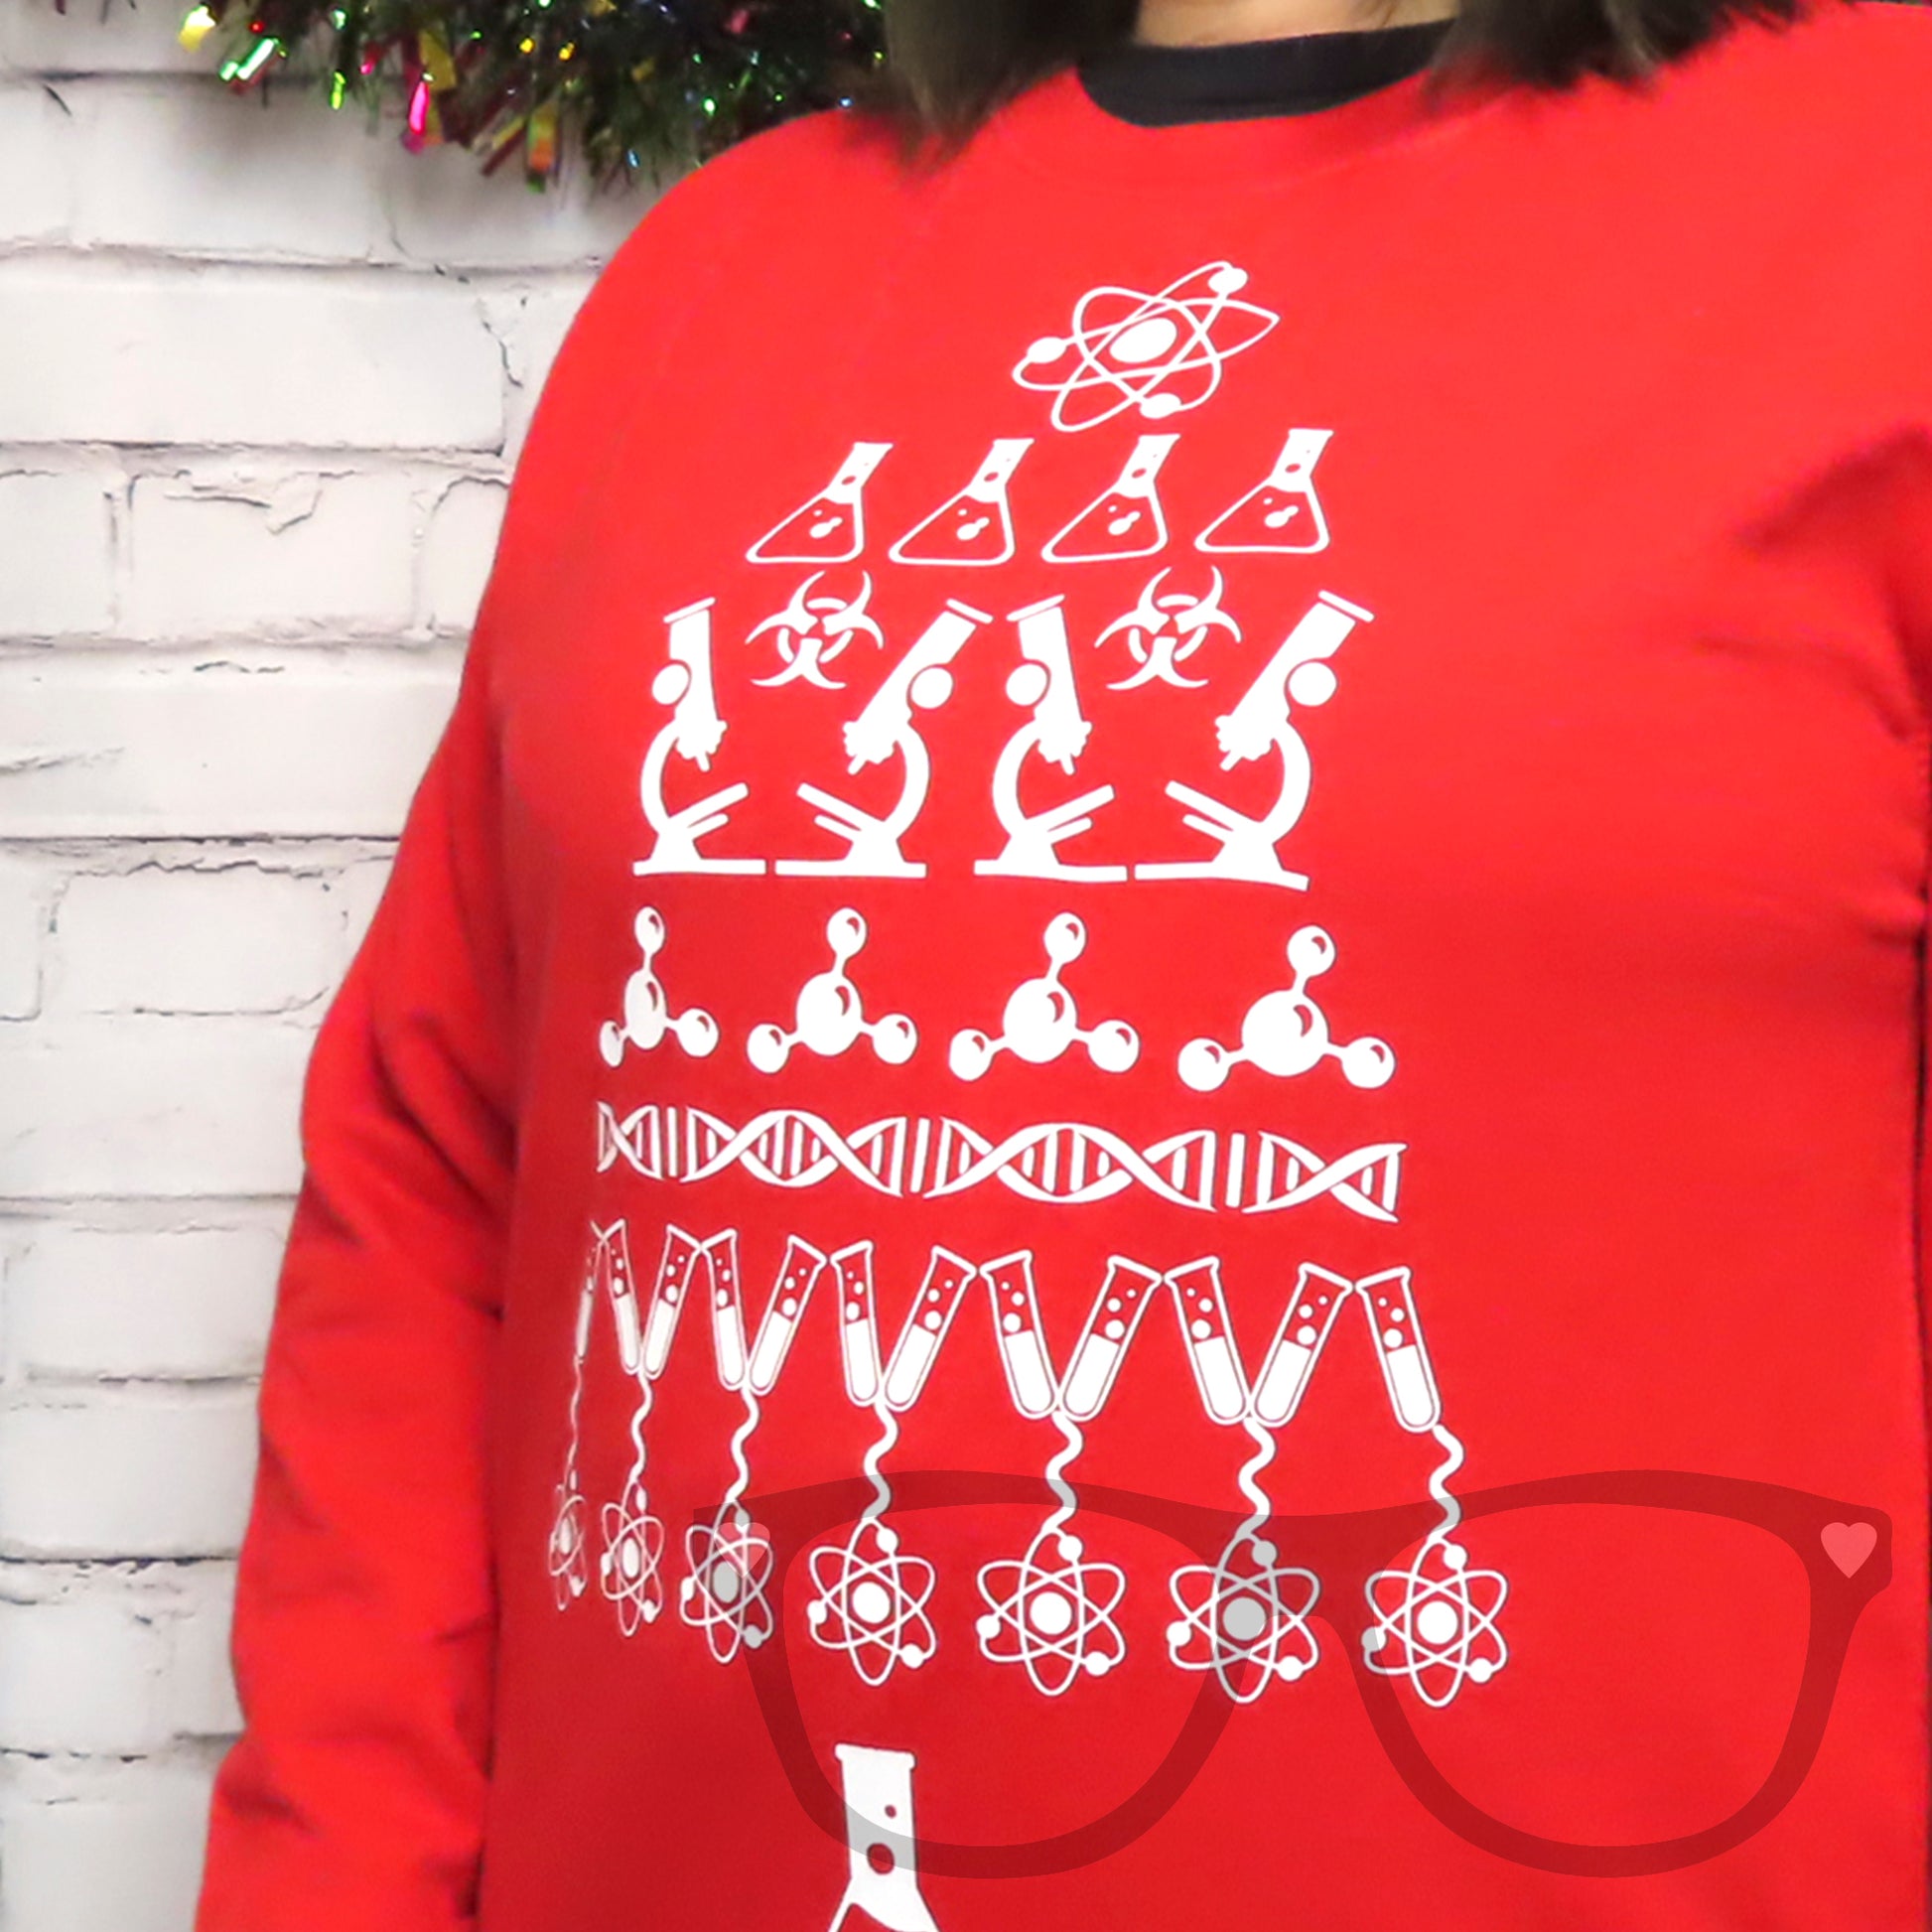 Science sweater, white design on fire red sweater great for the festive period